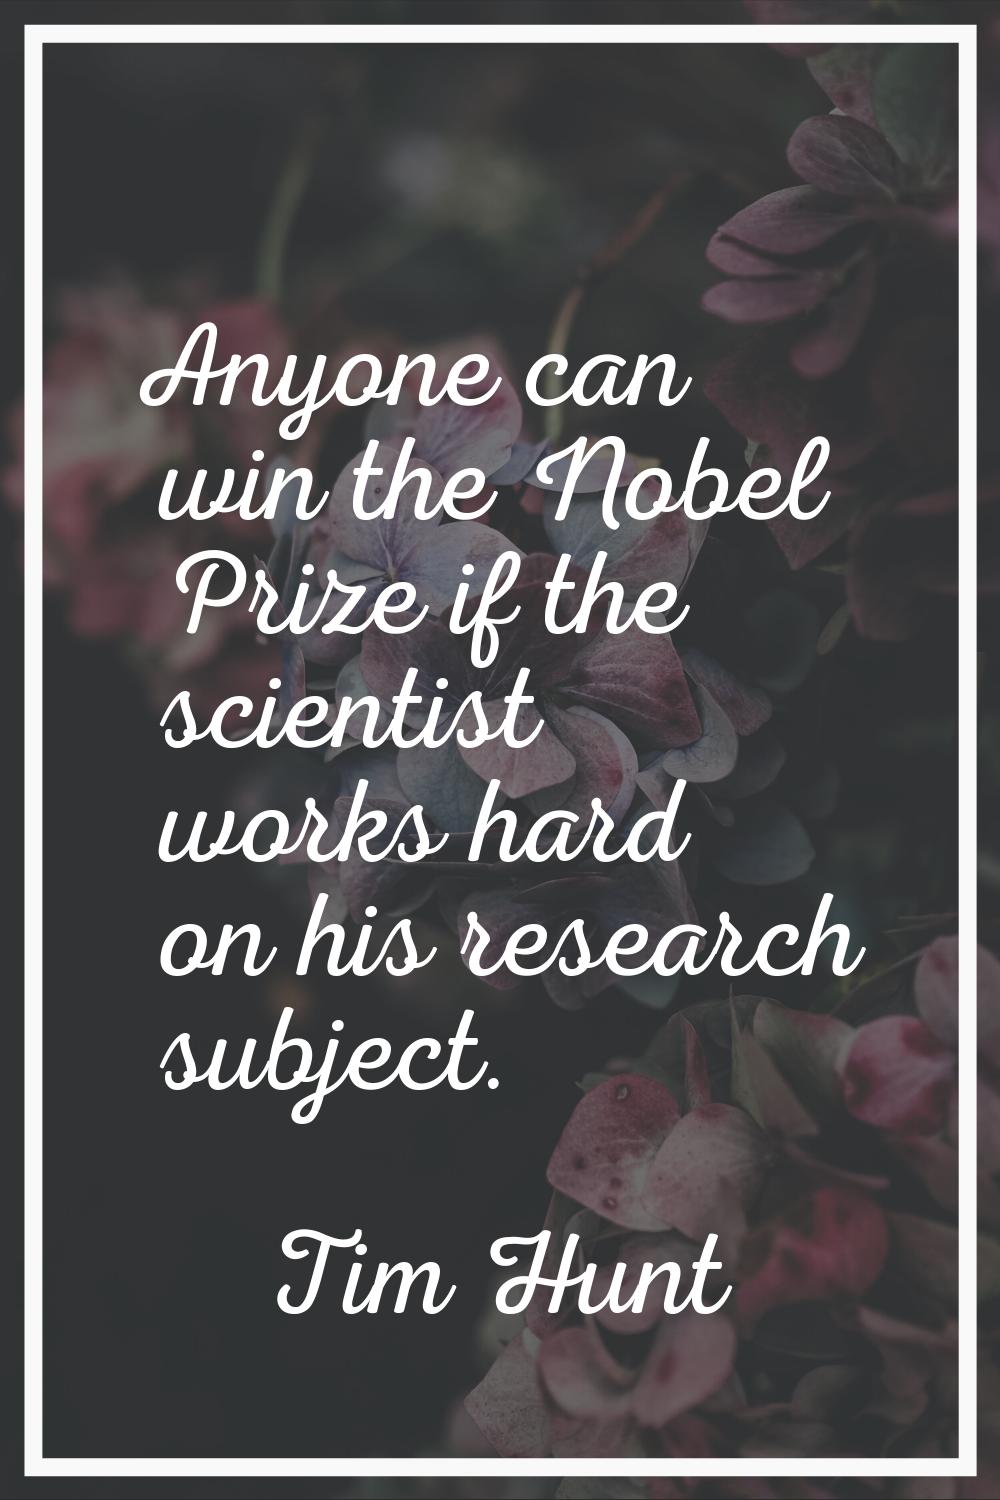 Anyone can win the Nobel Prize if the scientist works hard on his research subject.